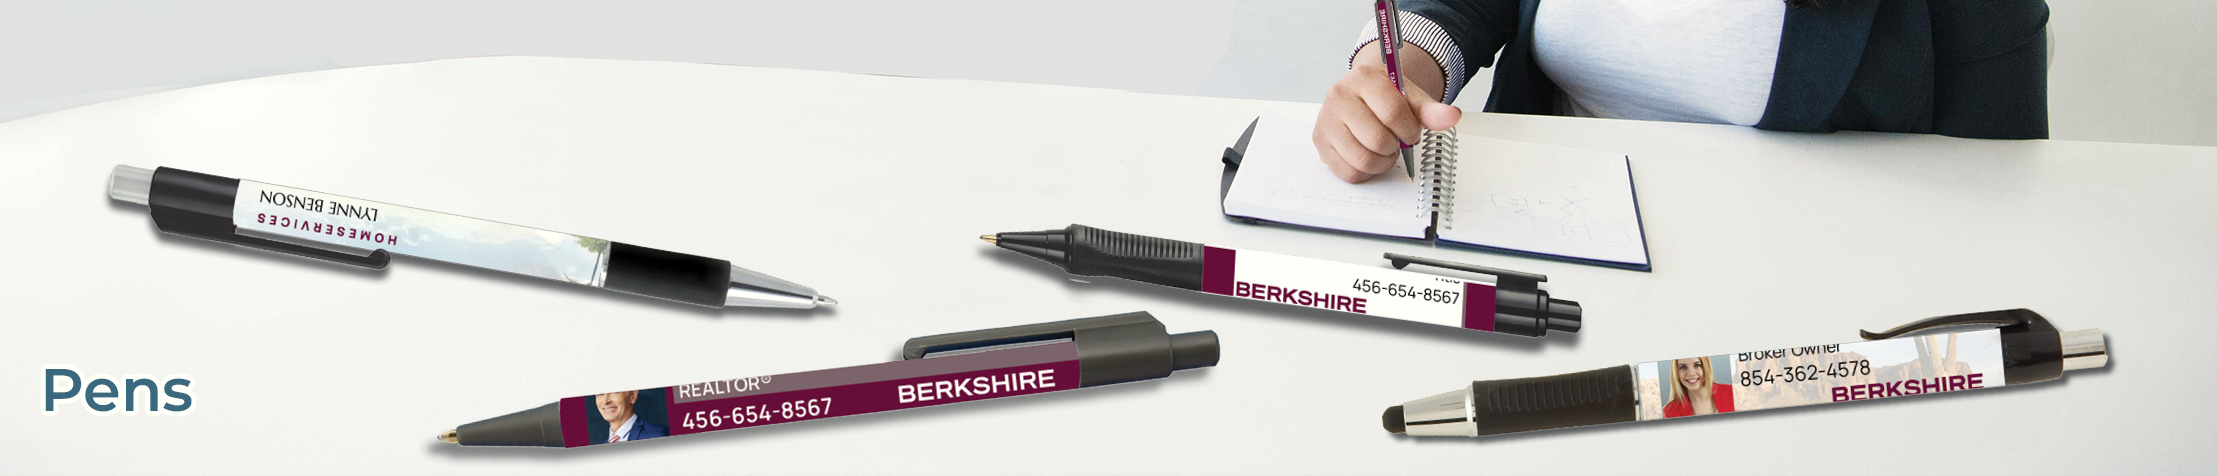 Berkshire Hathaway Real Estate Pens - Berkshire Hathaway  personalized realtor promotional products | BestPrintBuy.com